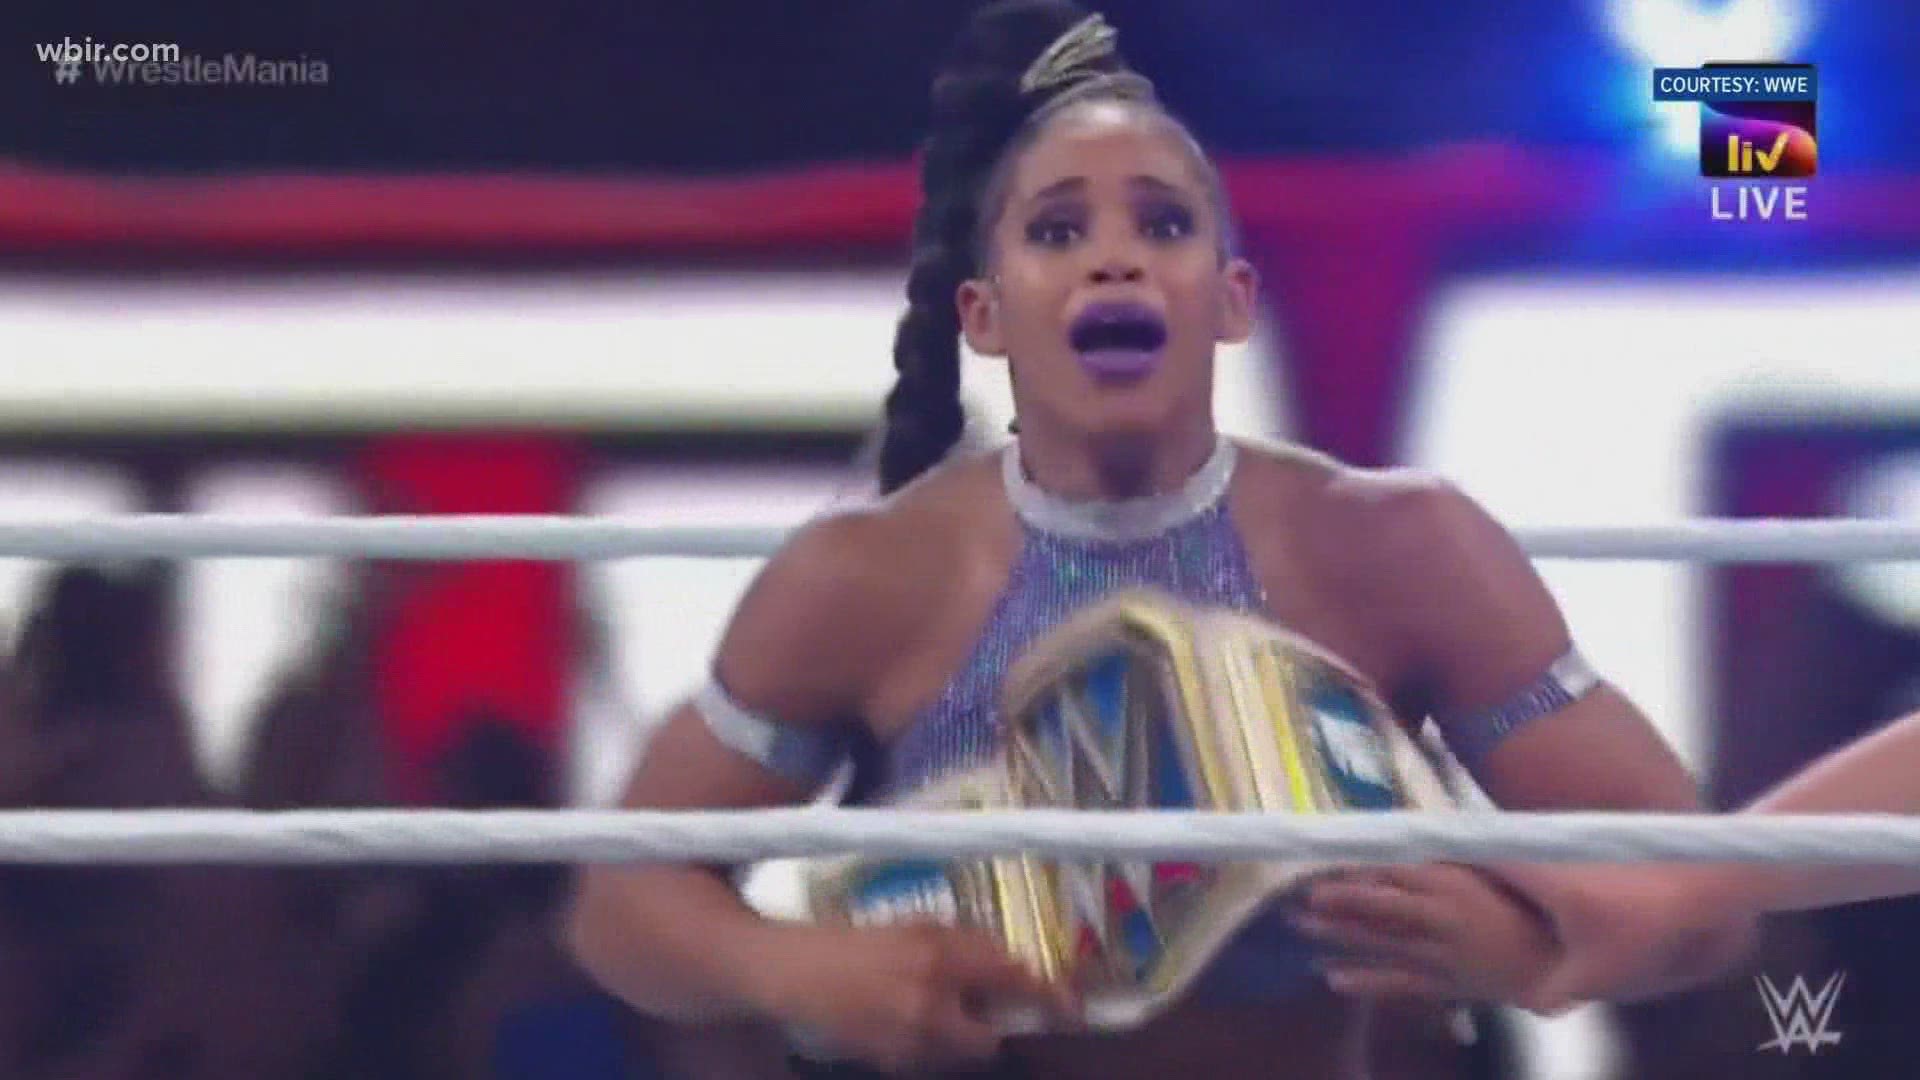 Belair won the award along with Sasha Banks. The pair became the first Black women to main event WrestleMania in 2021.